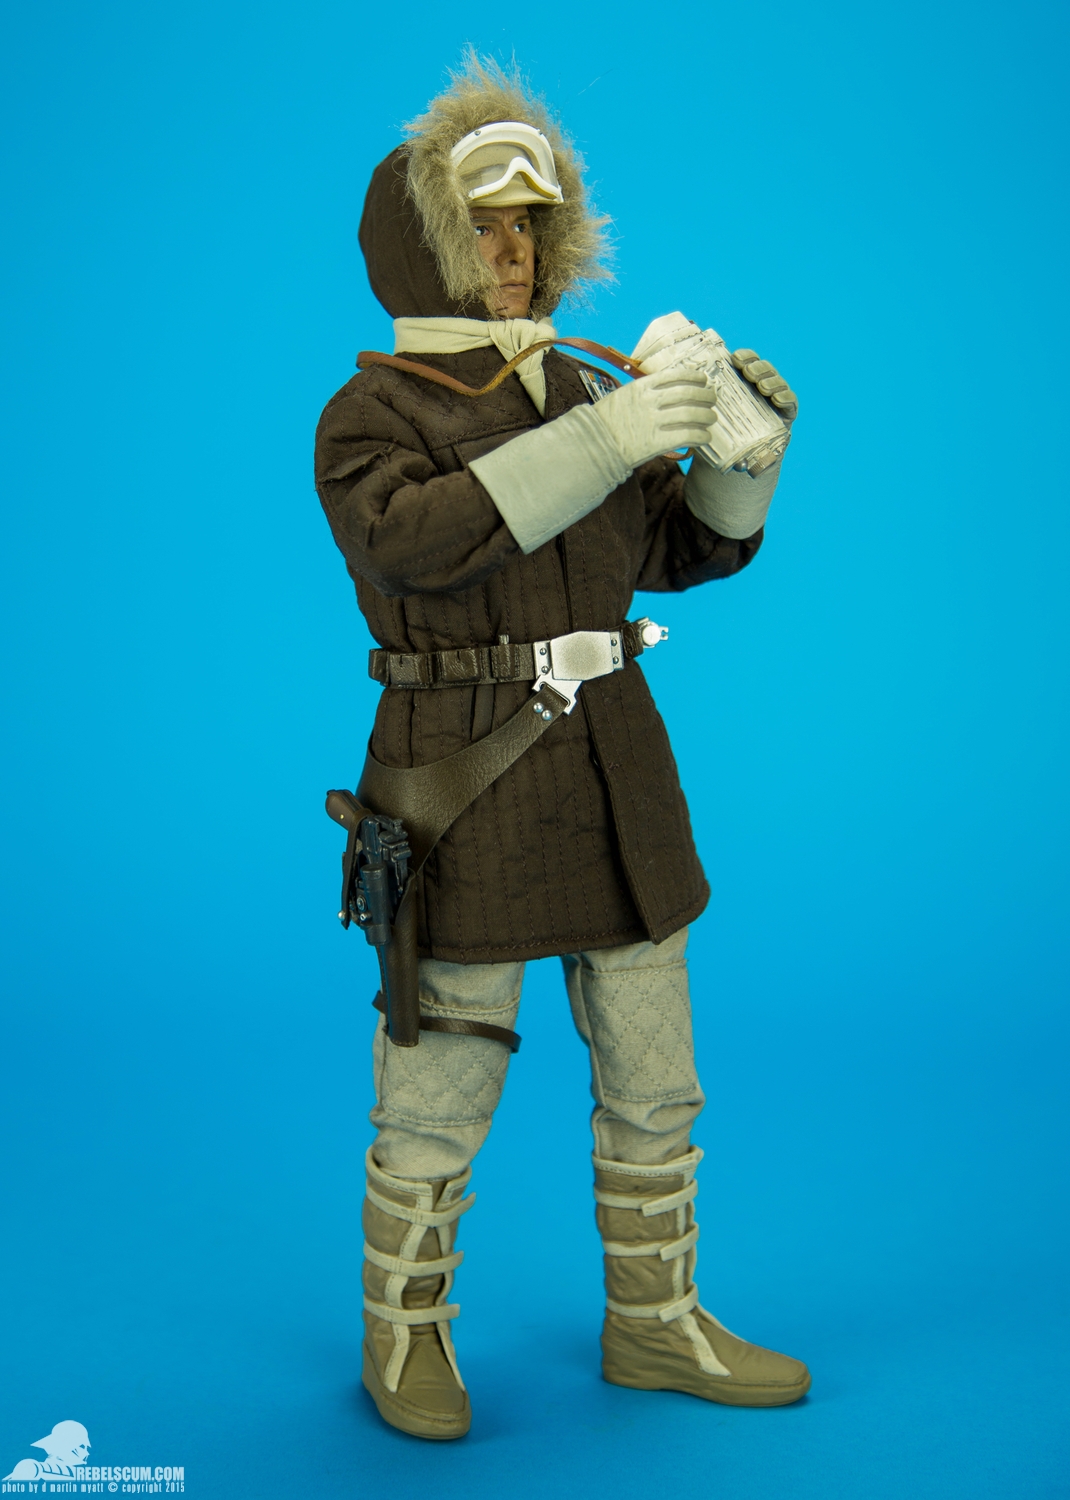 Han-Solo-Hoth-Brown-Sixth-Scale-Sideshow-Collectibles-Star-Wars-025.jpg